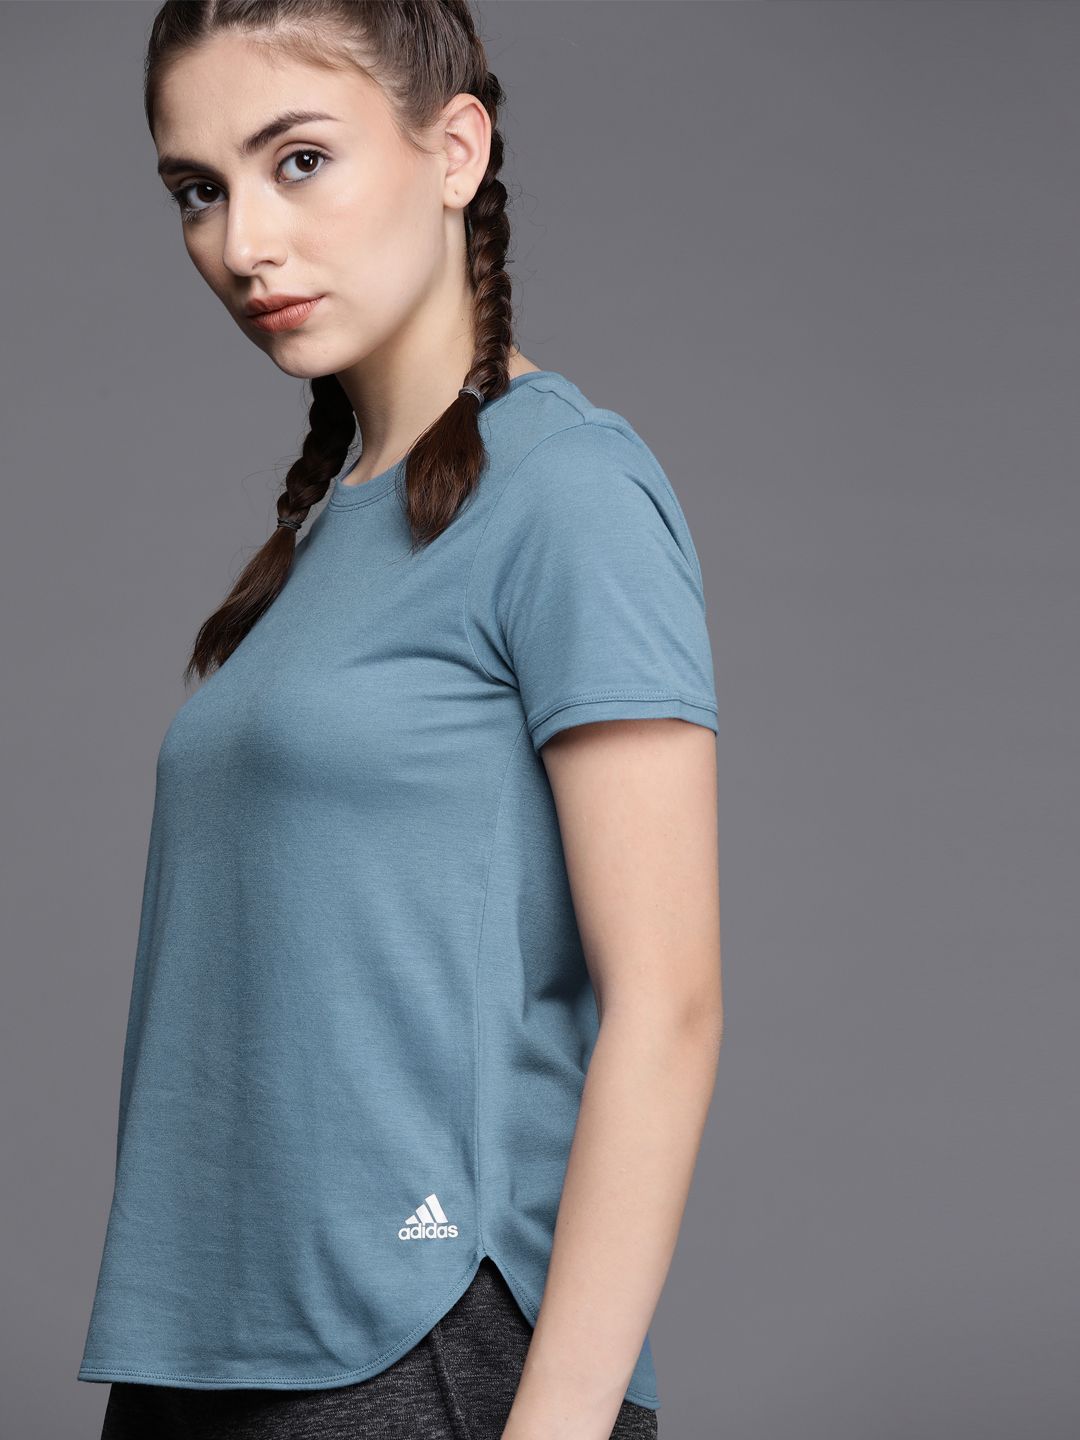 ADIDAS Women Blue Training or Gym Sustainable T-shirt Price in India